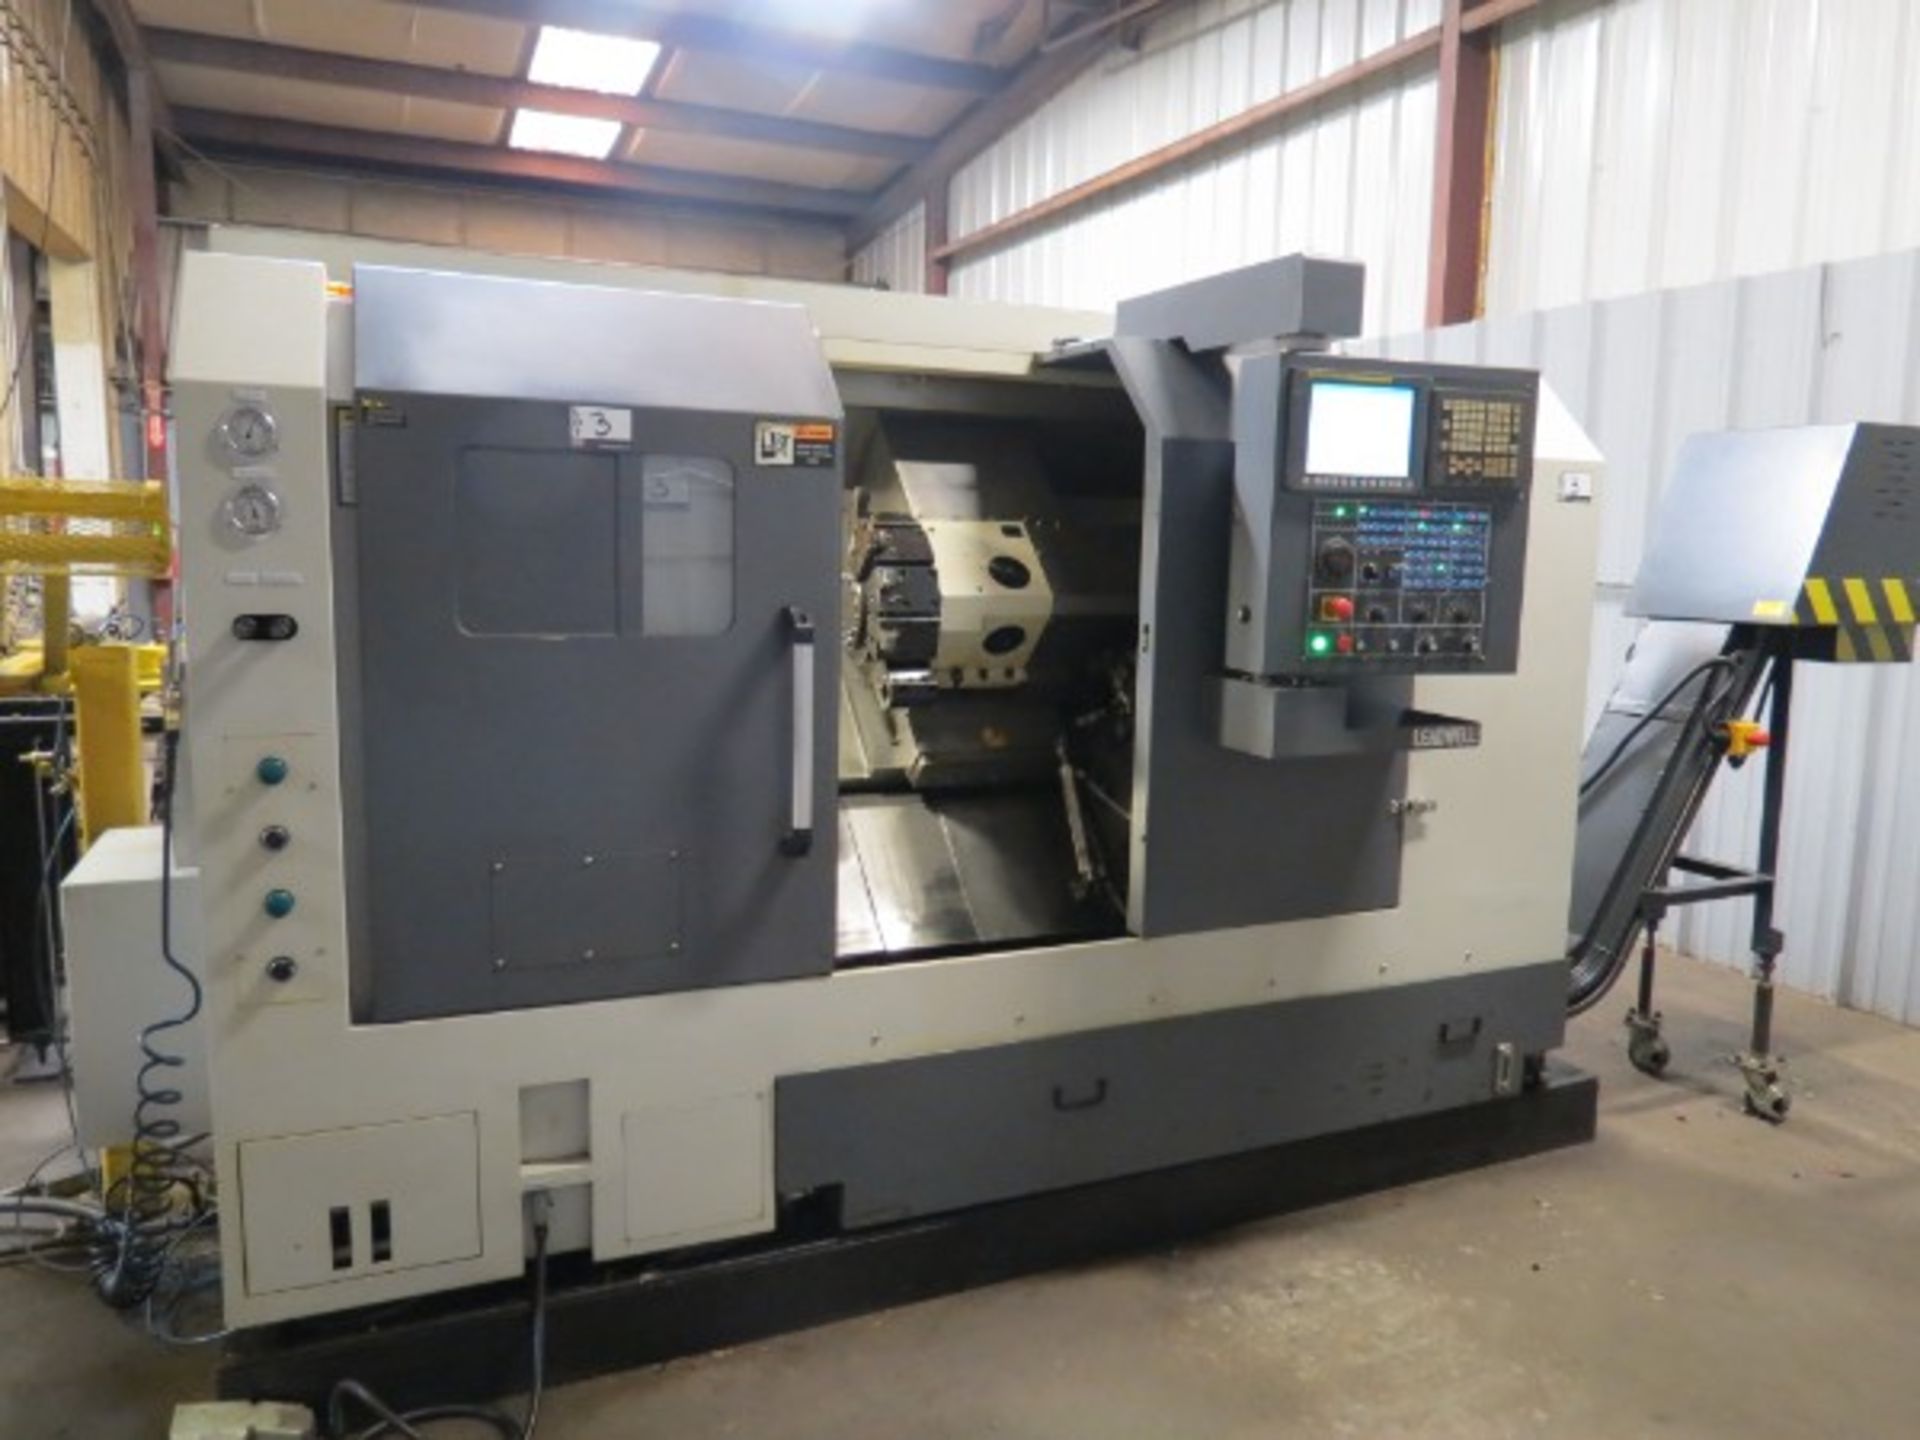 Leadwell T-7 CNC Turning Center Fanuc 0i-TD, 20 HP, 4500 RPM, 8" Chuck, X-Axis 7.9", Y-Axis 23.6", - Image 4 of 7